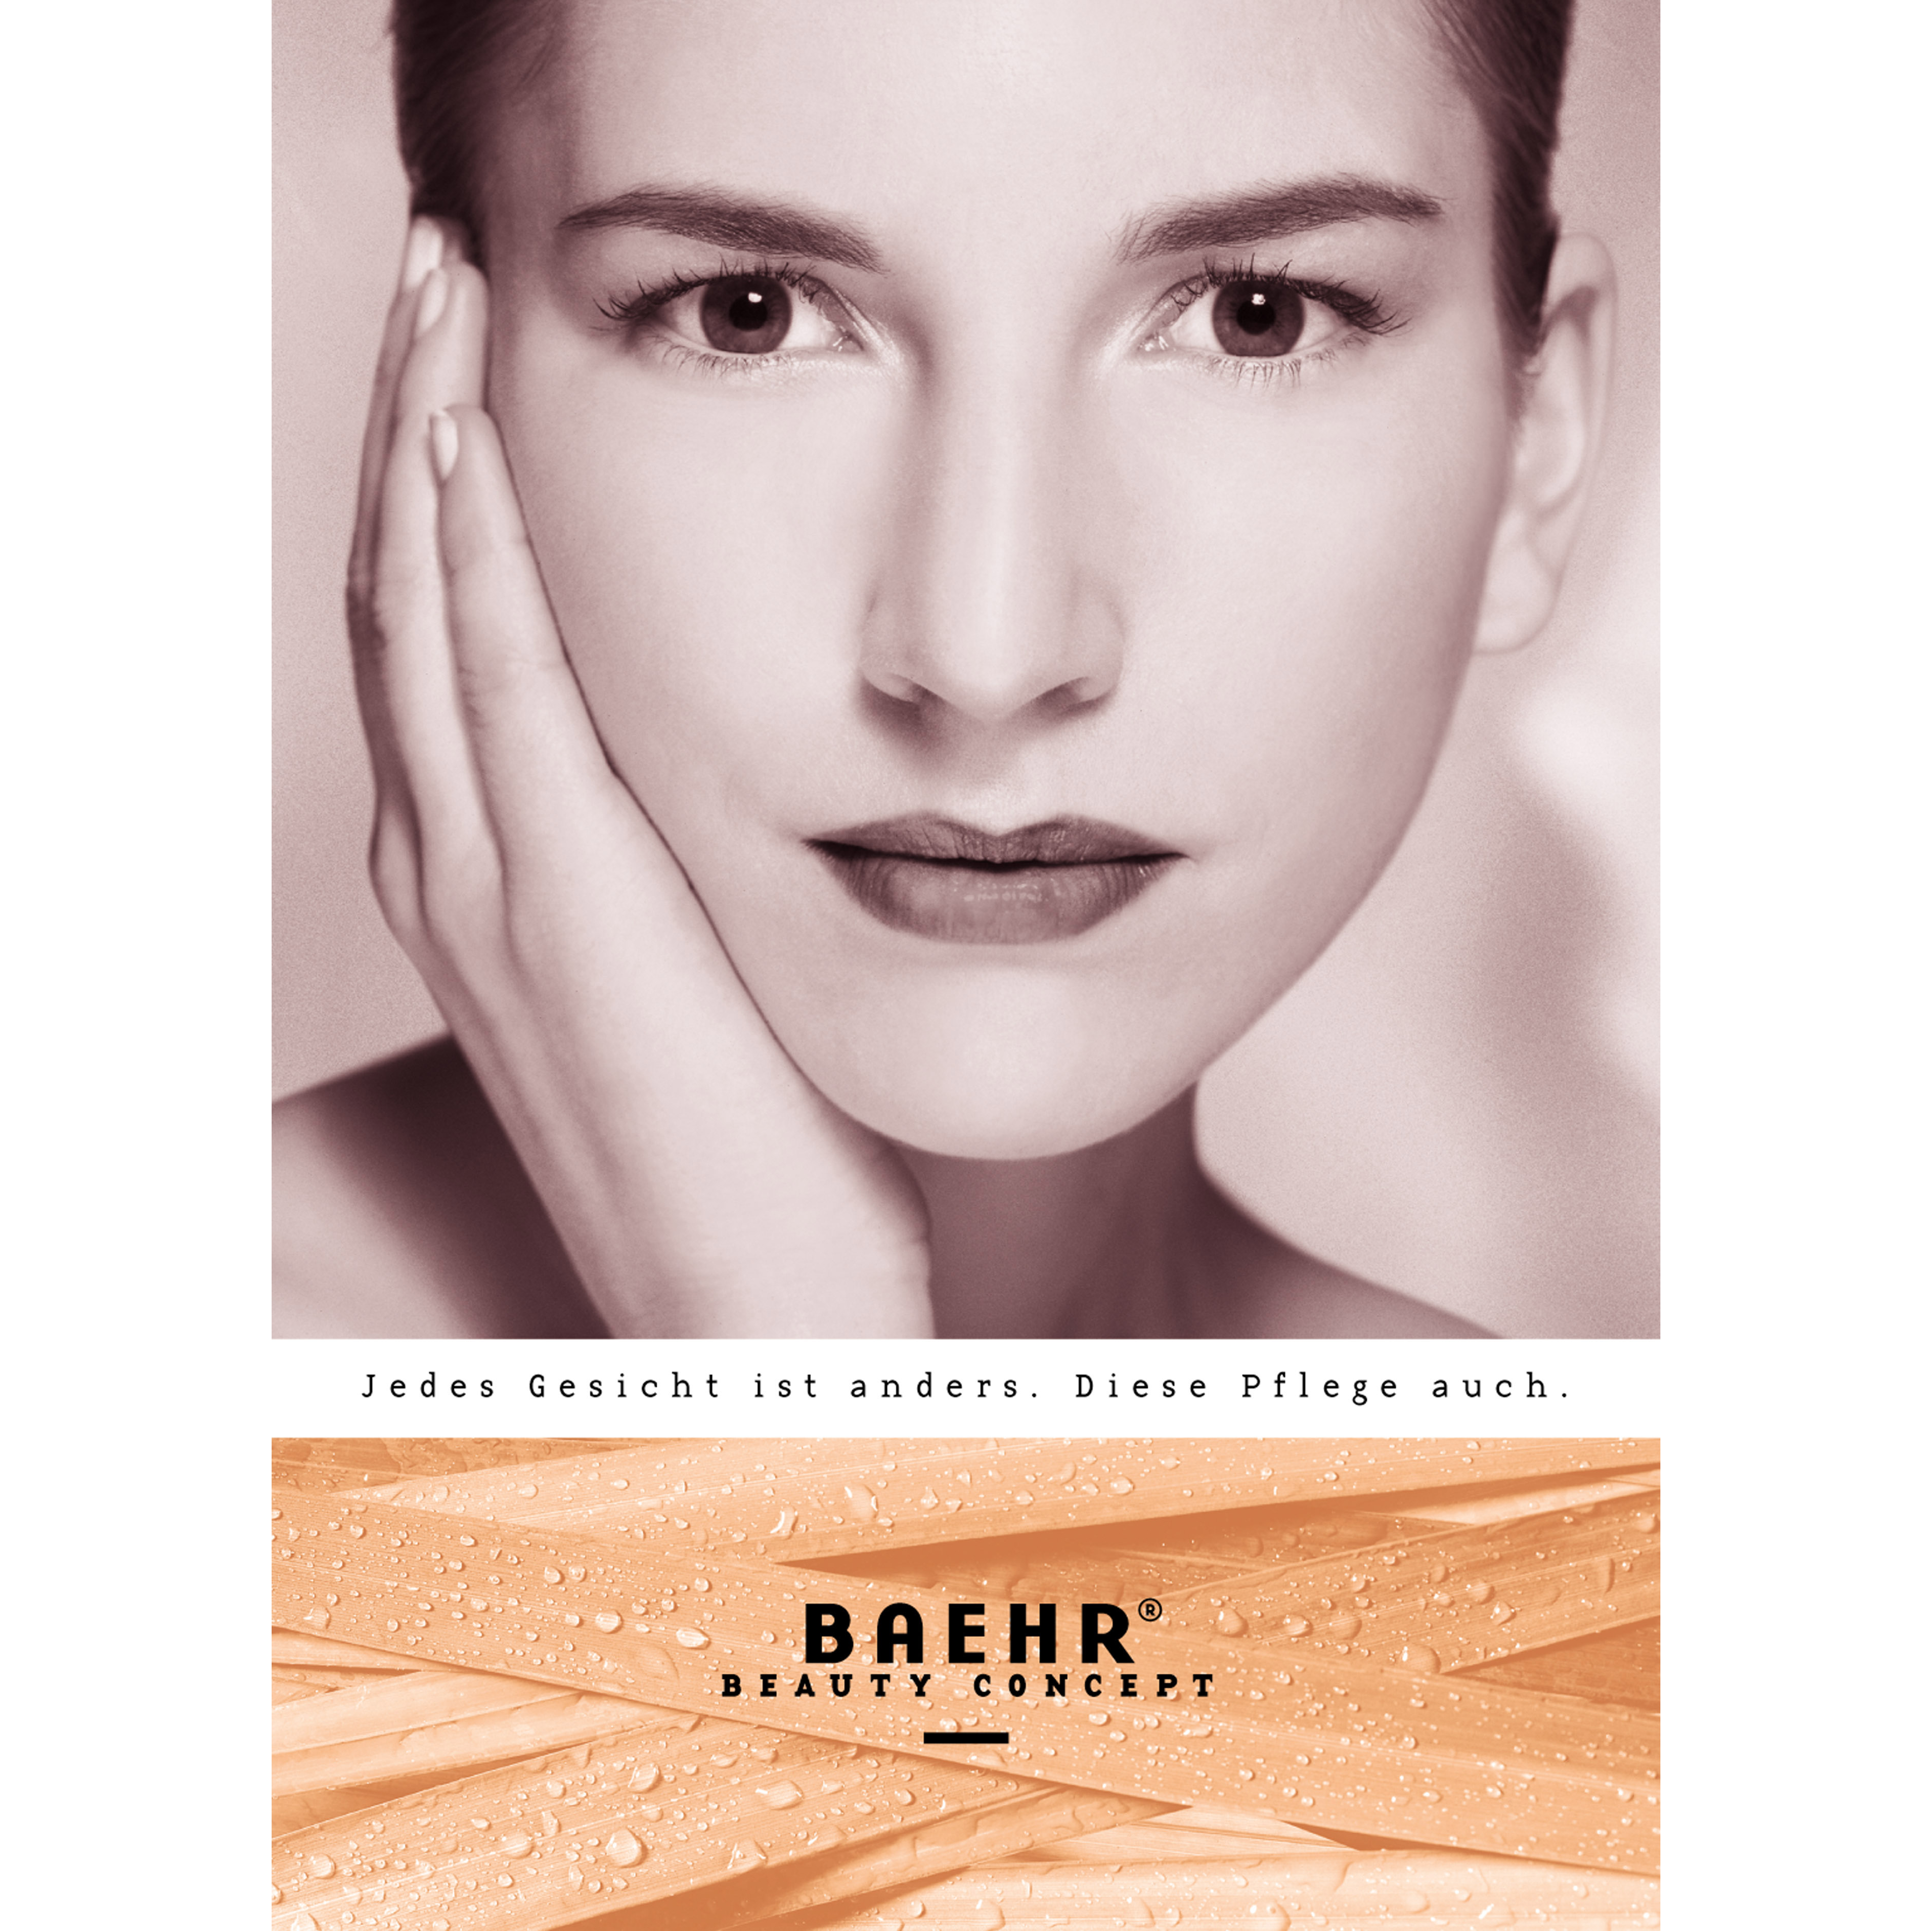 poster-baehr-beauty-concept_25095001